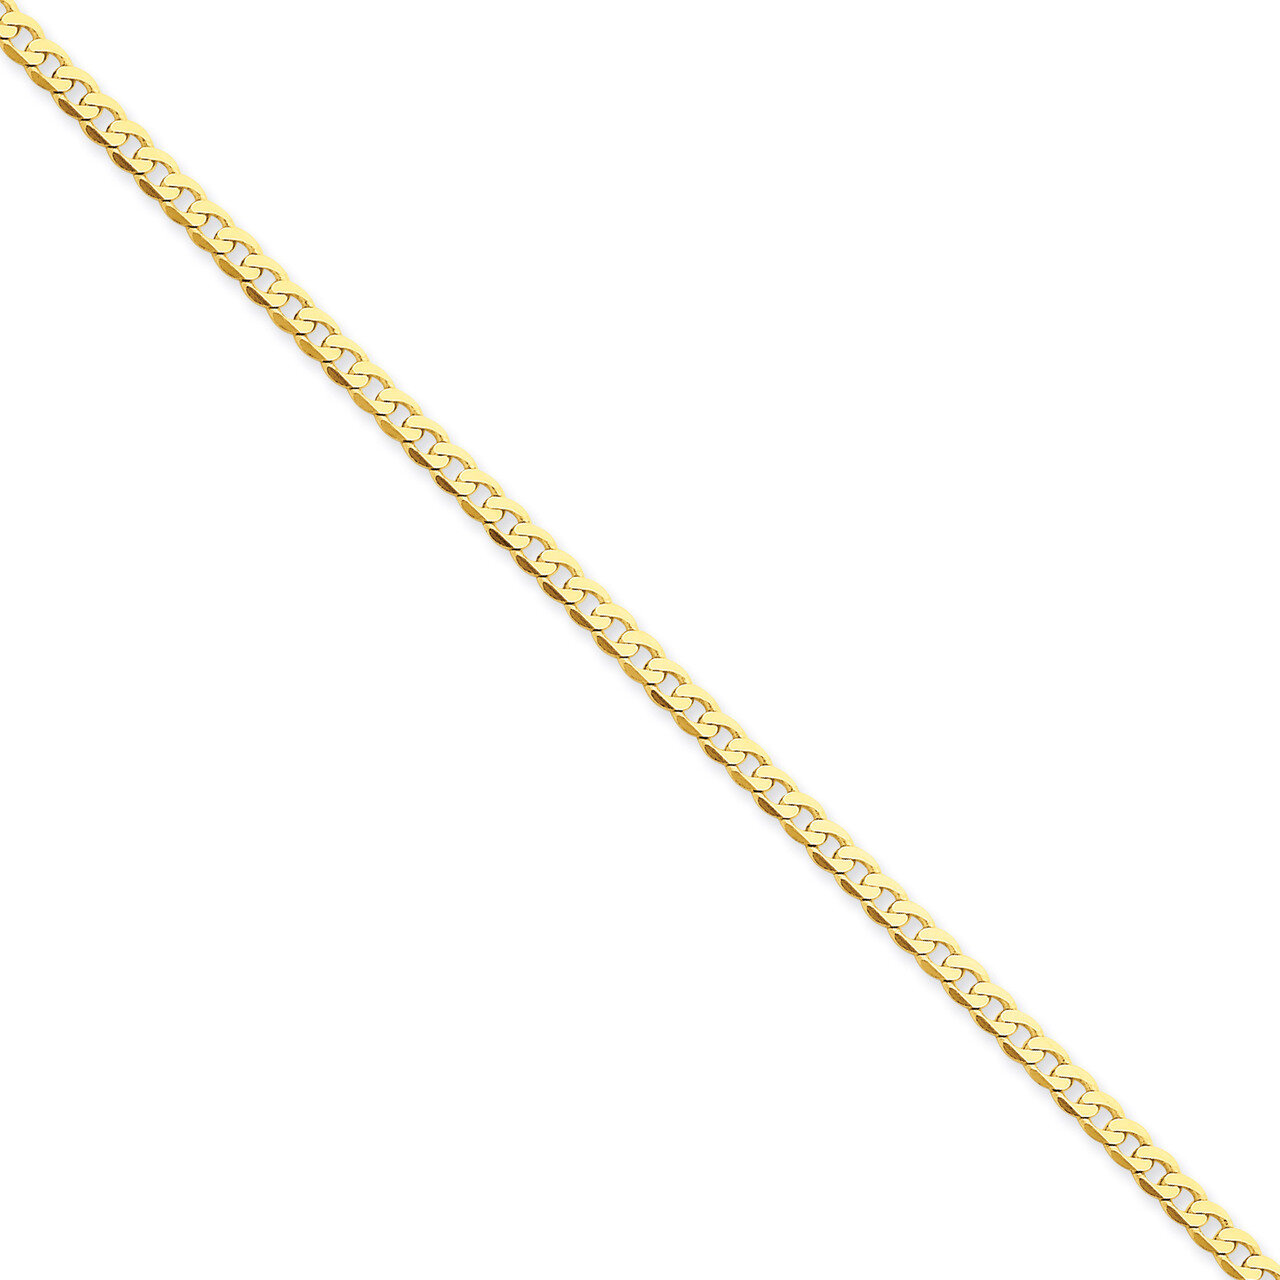 2.9mm Solid Polished beveled Curb Chain 22 Inch 14k Gold FBU080-22